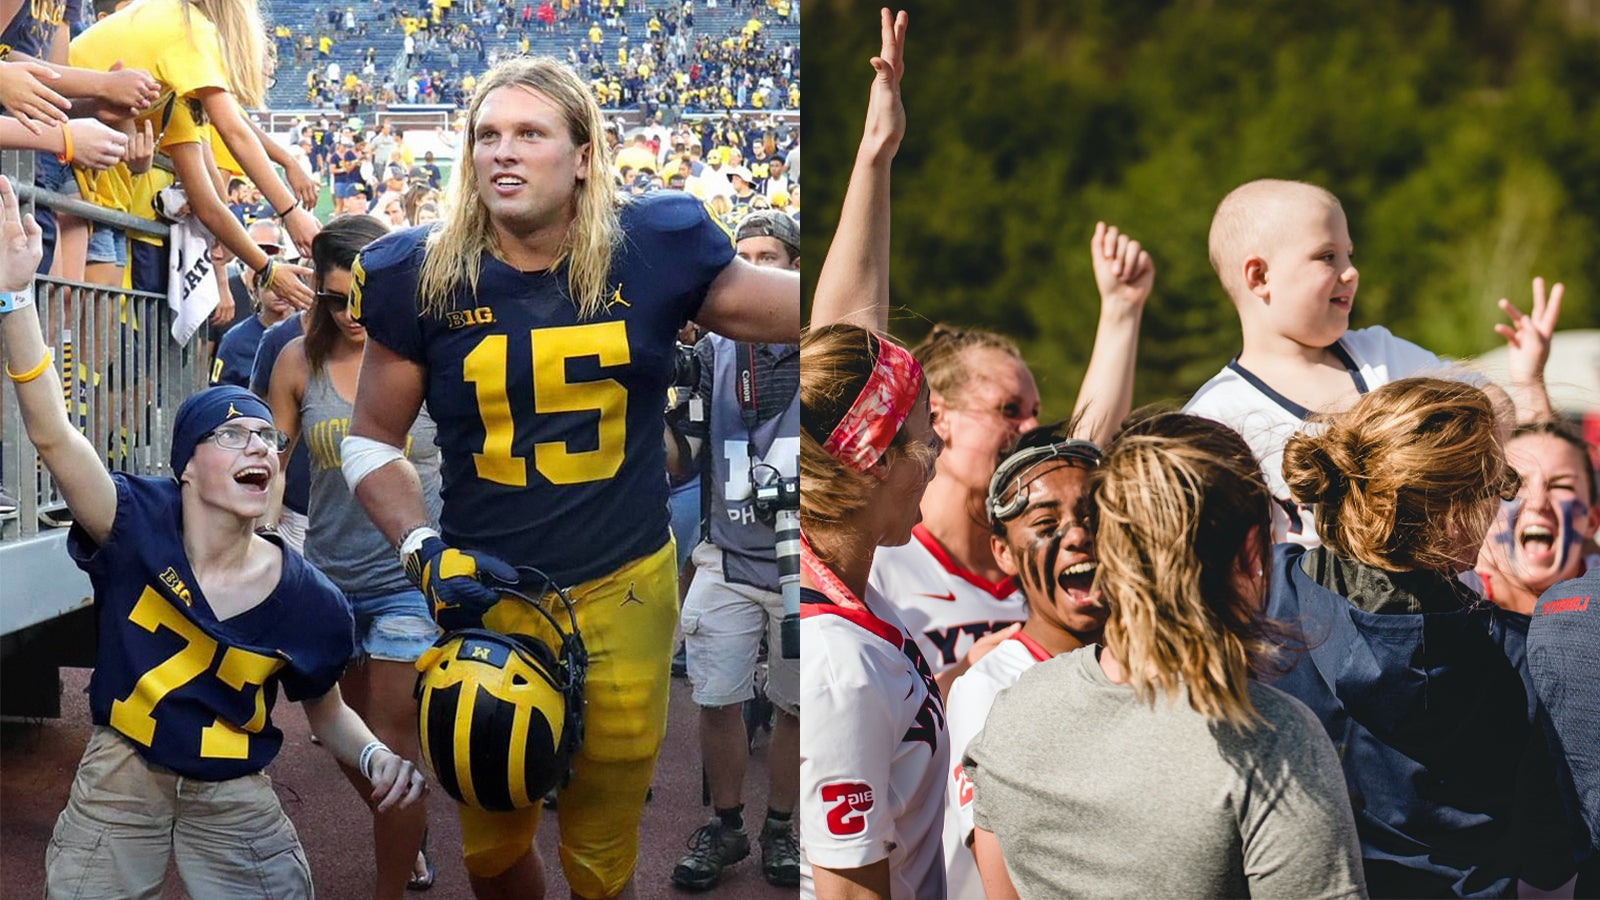 Split image of a football player cheering with a child, and a group of athletes raising a child on their shoulders